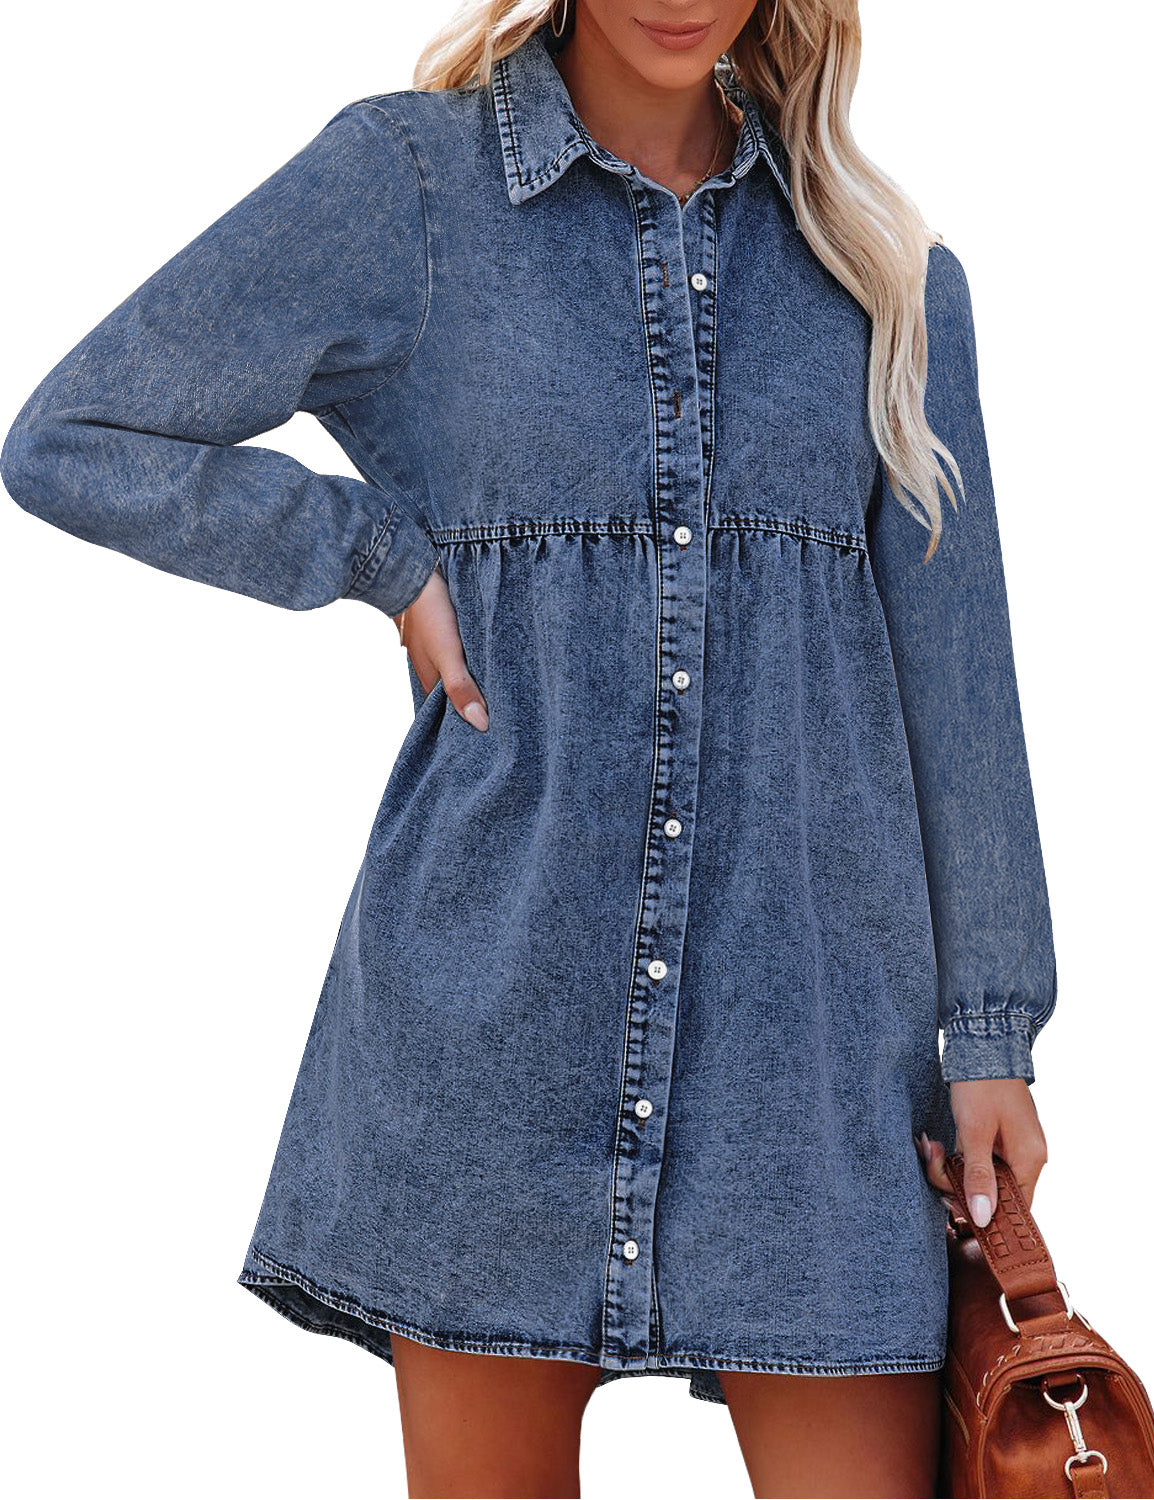 Autumn Womens Long Sleeve Denim Shirt Dress With Button Pocket Casual Loose  Kurta With Jeans Maxi Dress For Street Wear 210706 From Xue03, $34.97 |  DHgate.Com